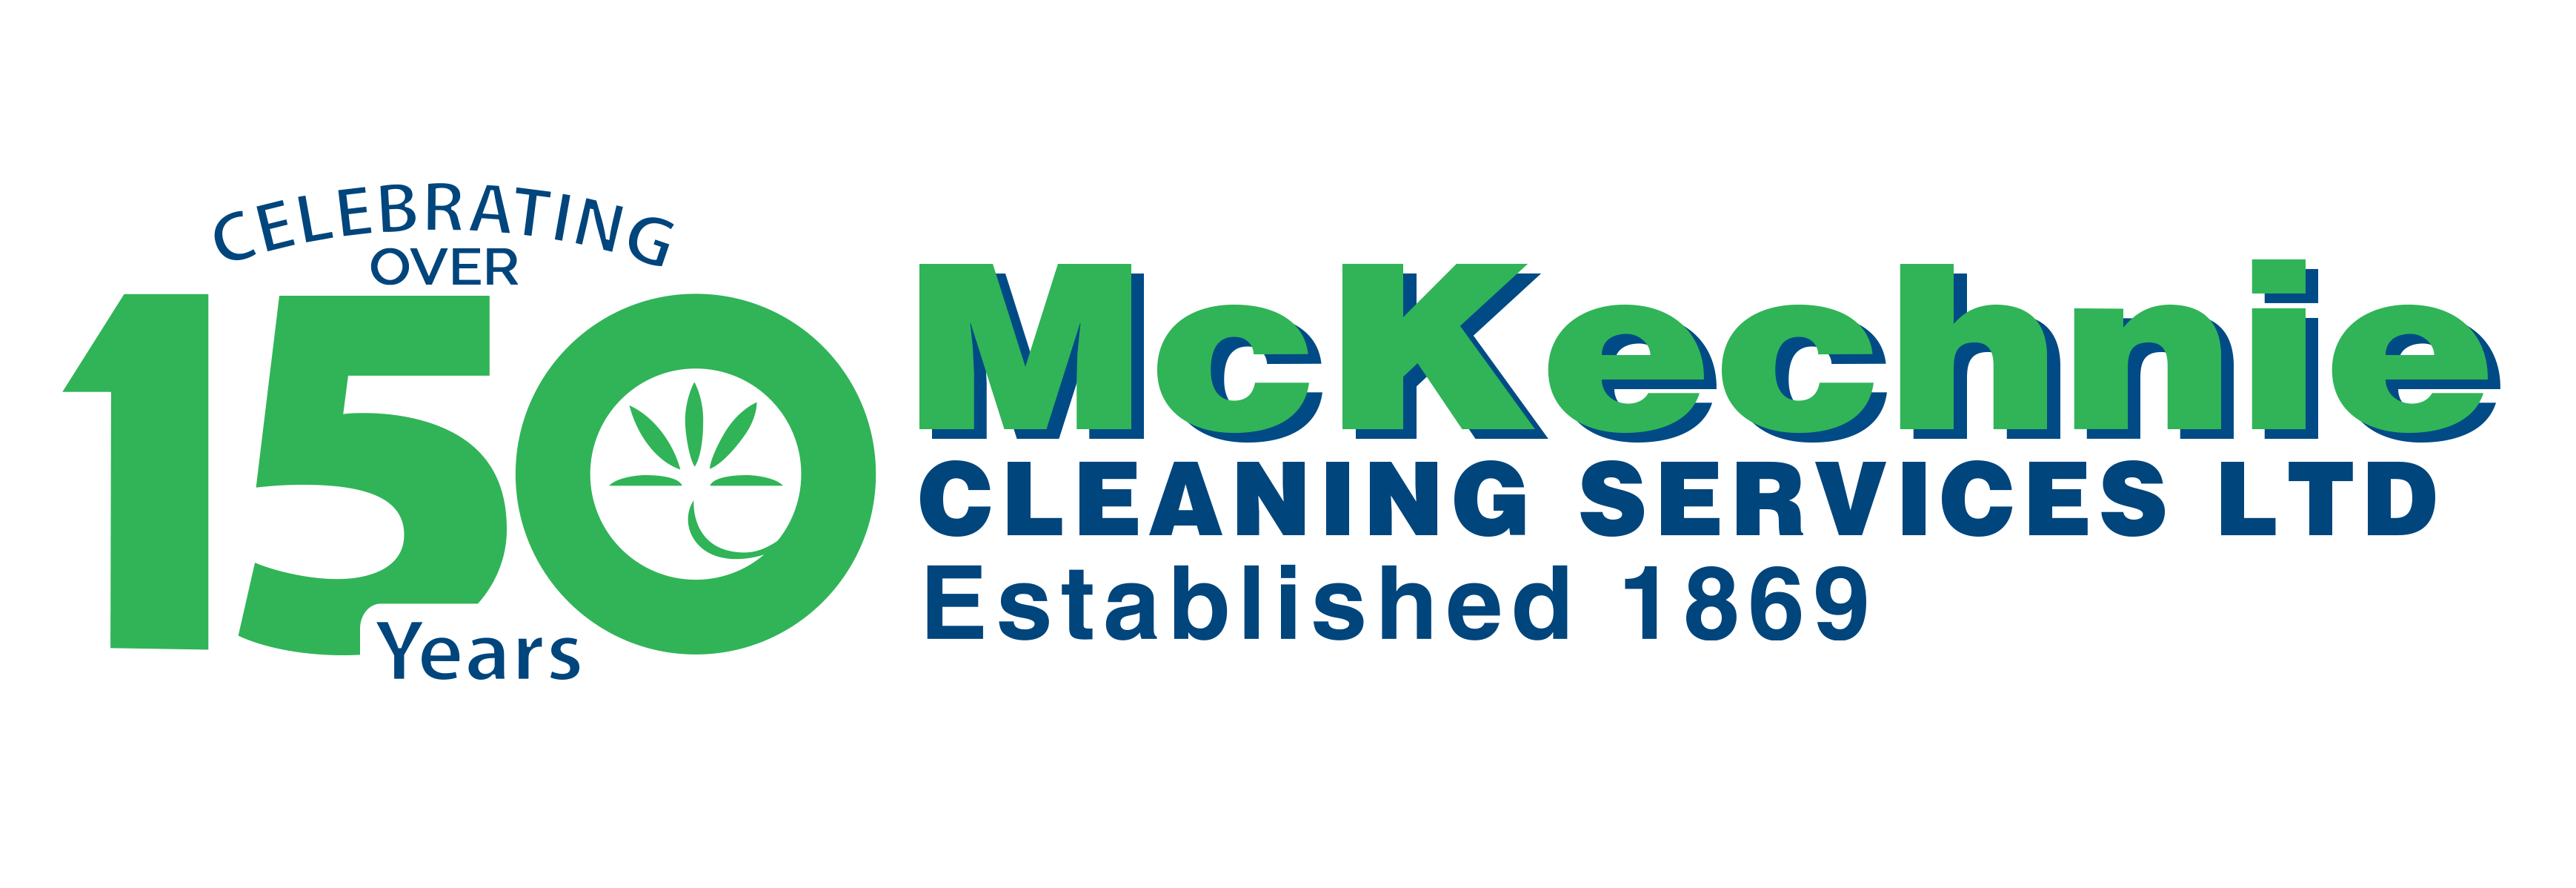 McKechnie Cleaning Services